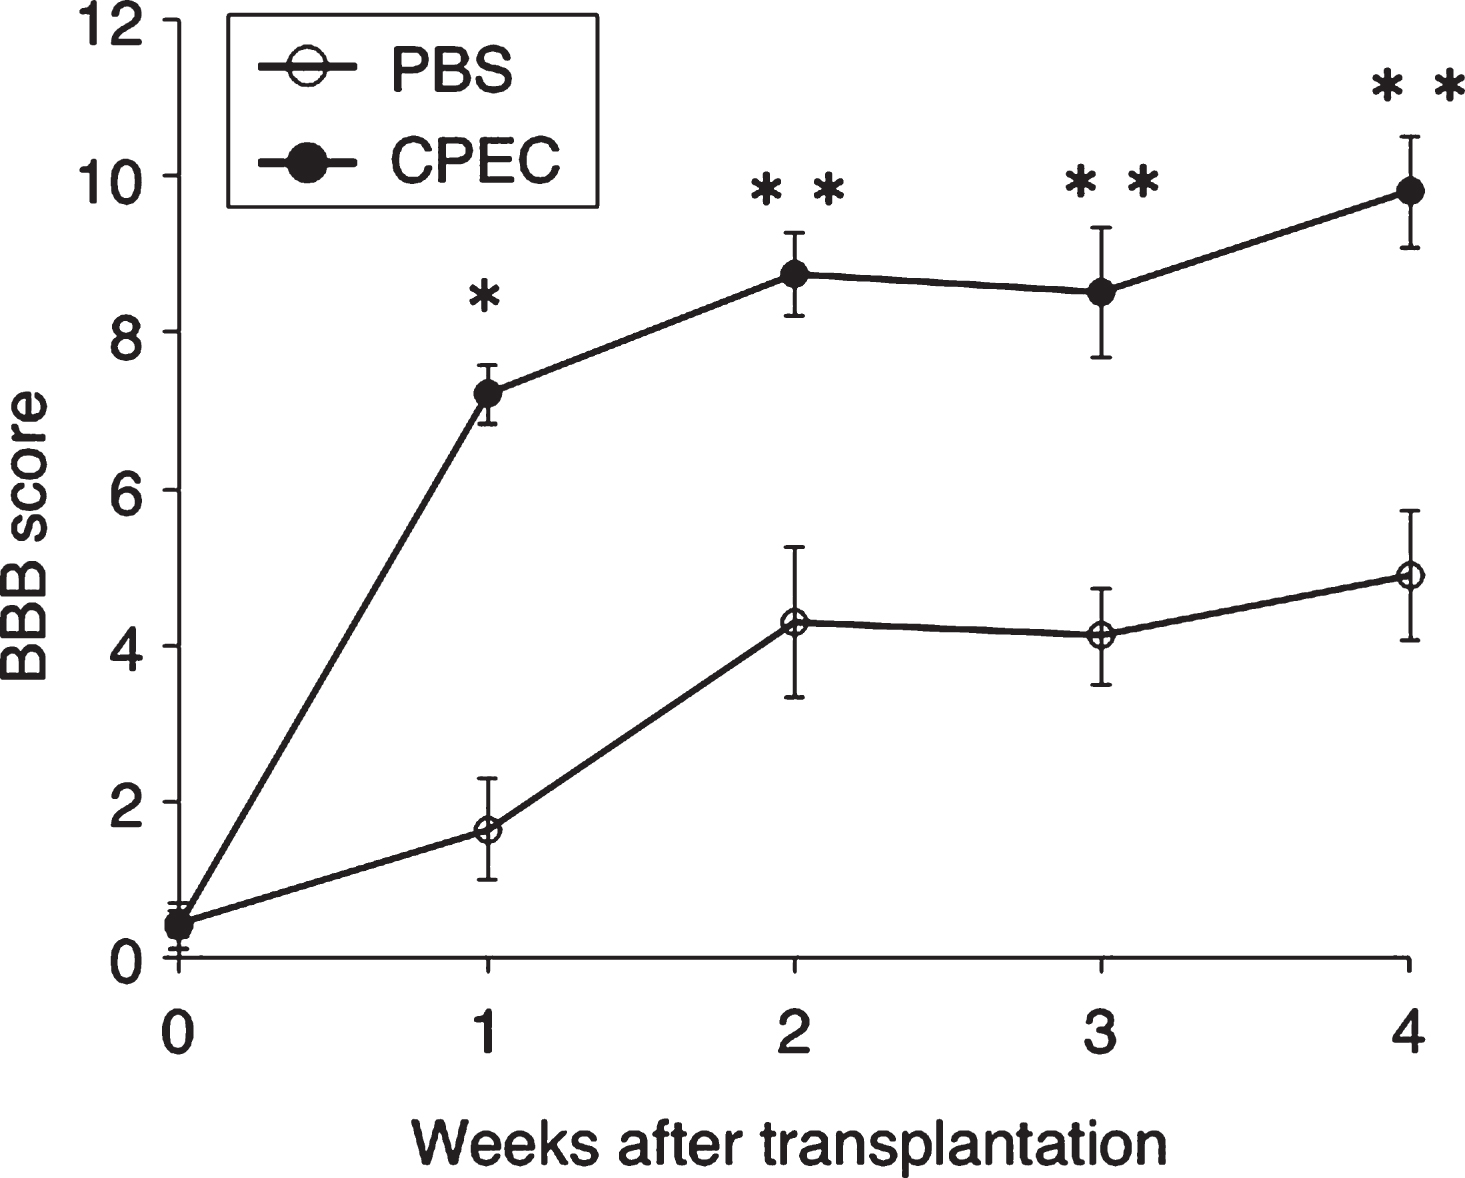 BBB scores. Effect of CPEC transplantation on locomotor behaviors. There are significant differences at 1-4 w-TP between the PBS-injected and CPEC-transplanted rats, at P < 0.0005 (*) and P < 0.005 (**).